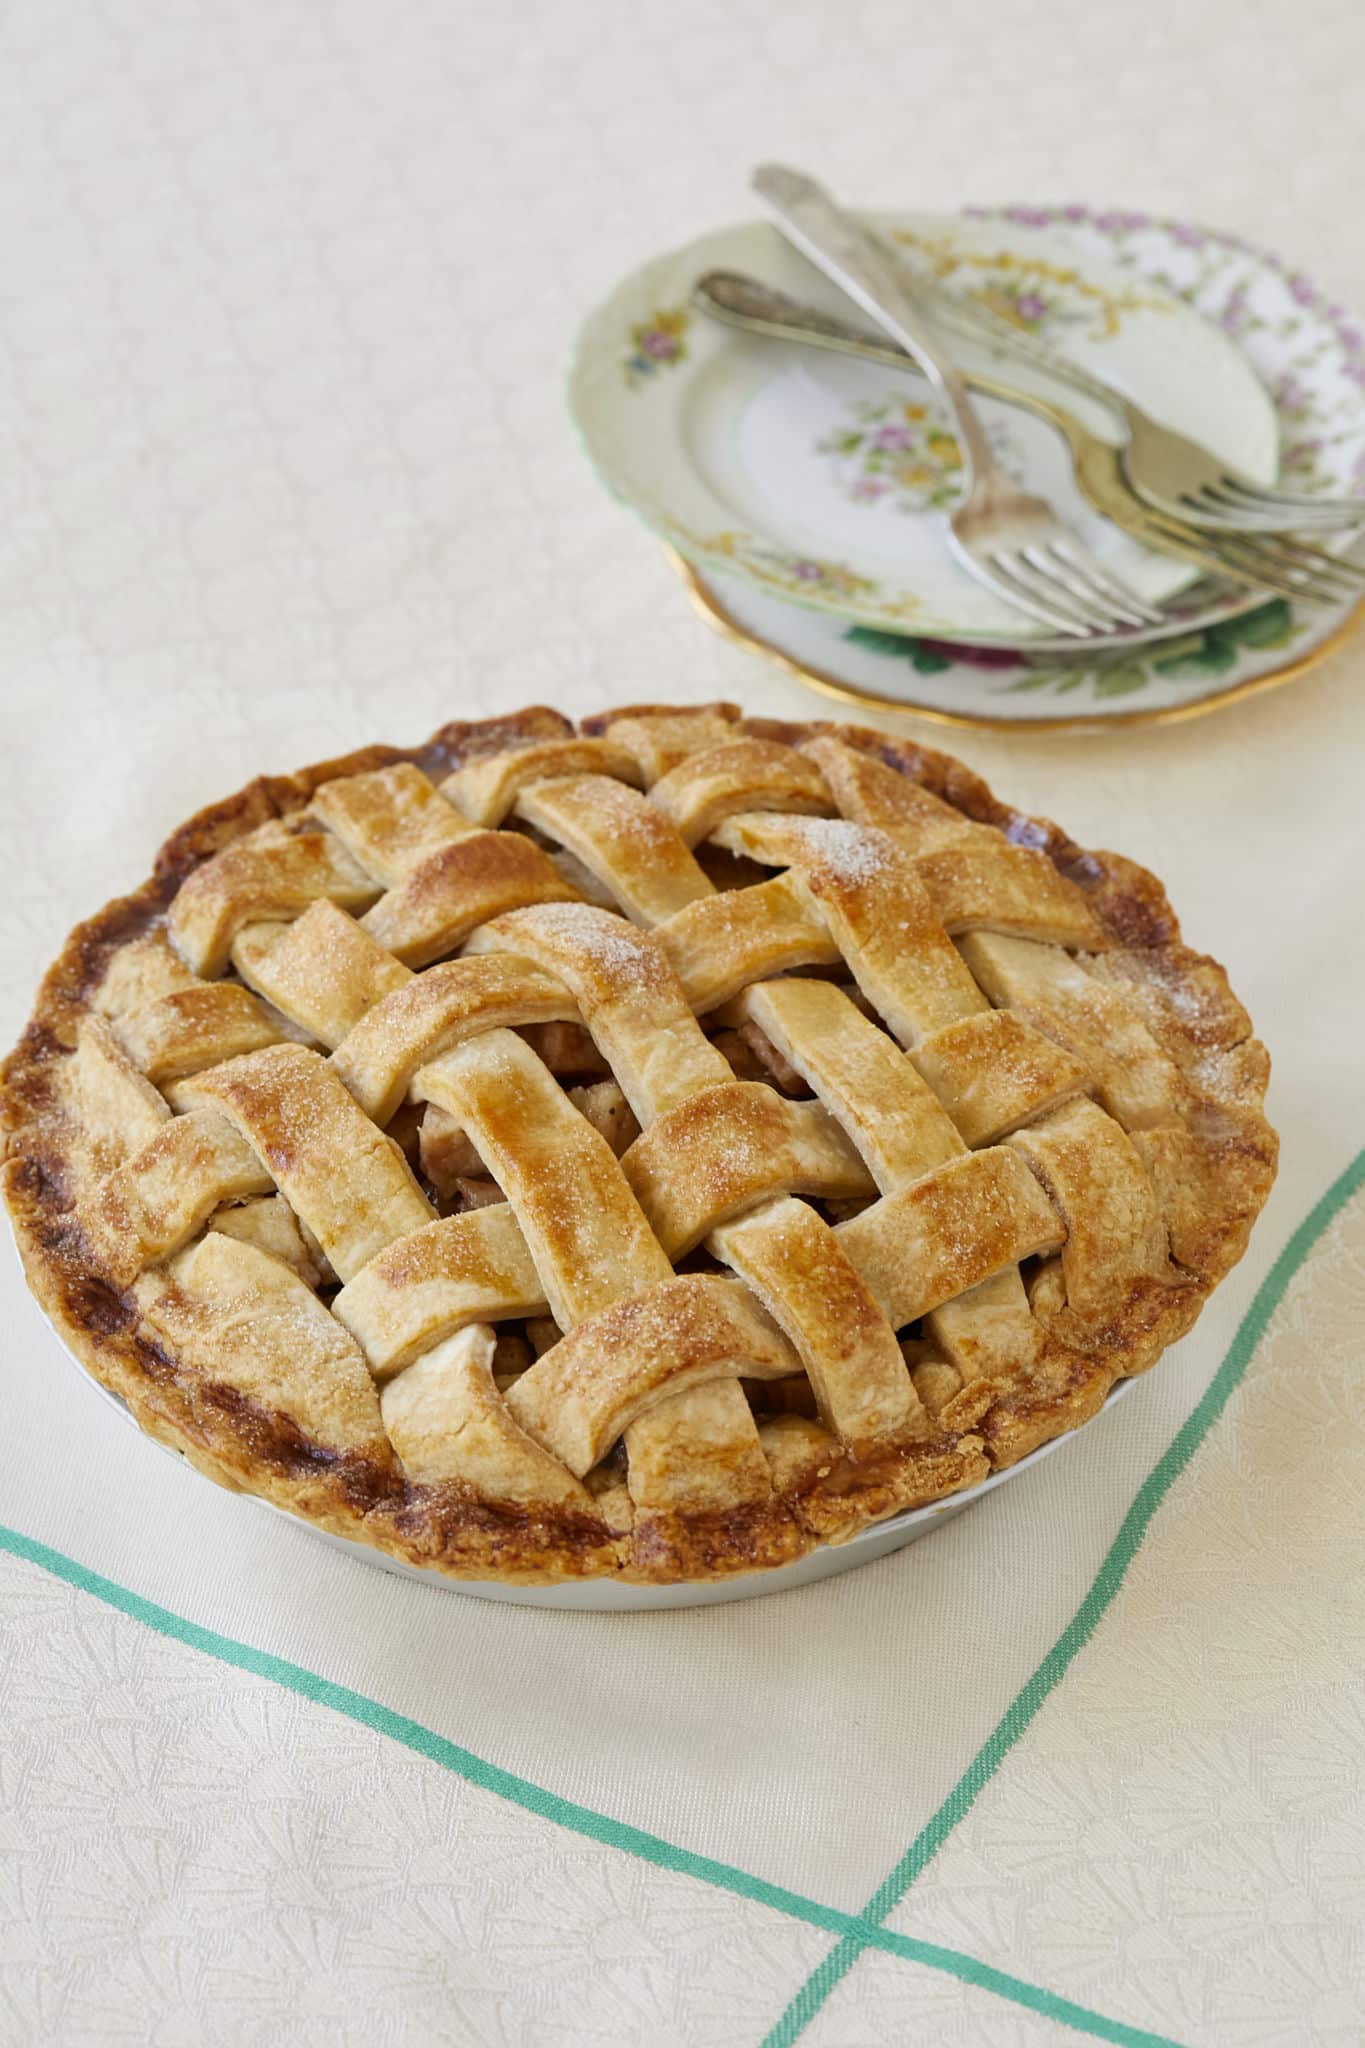 Homemade fresh pear pie is displayed on a white table cloth. The homemade pie has a lattice topping.